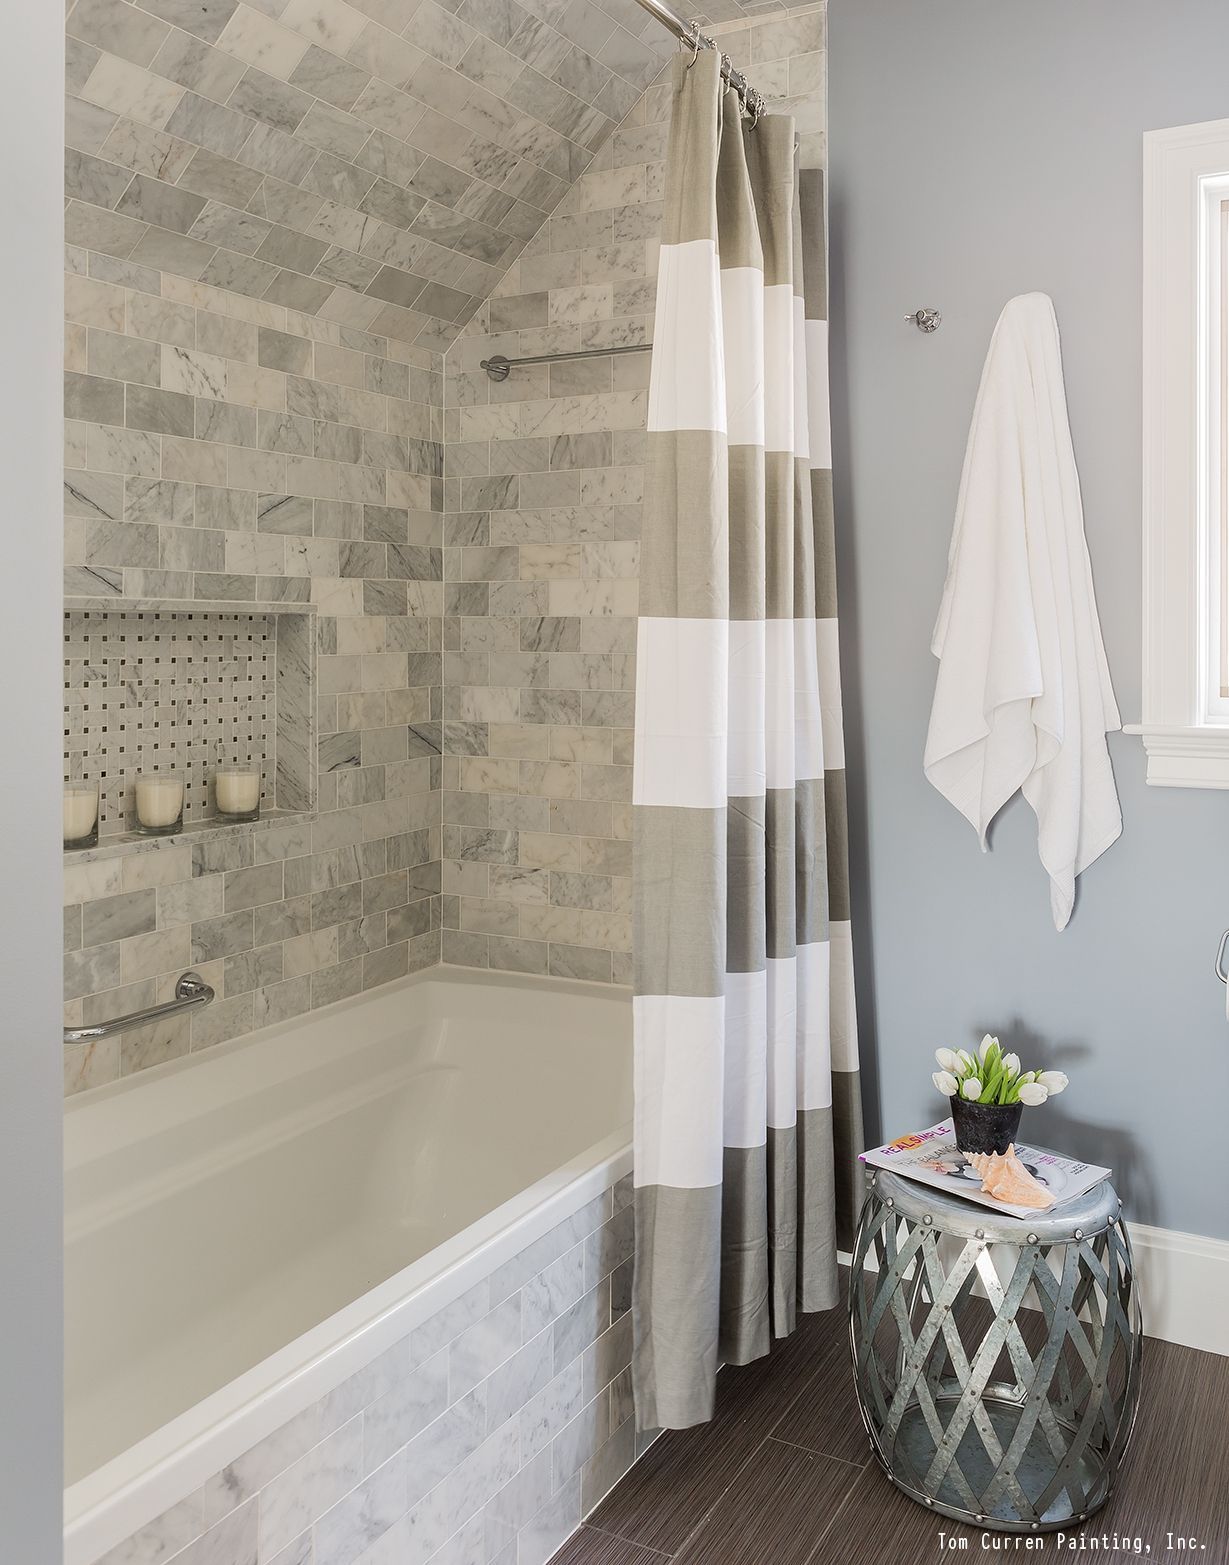 A gorgeous bathroom remodel with a tile shower, white trim and a fresh coat of blu